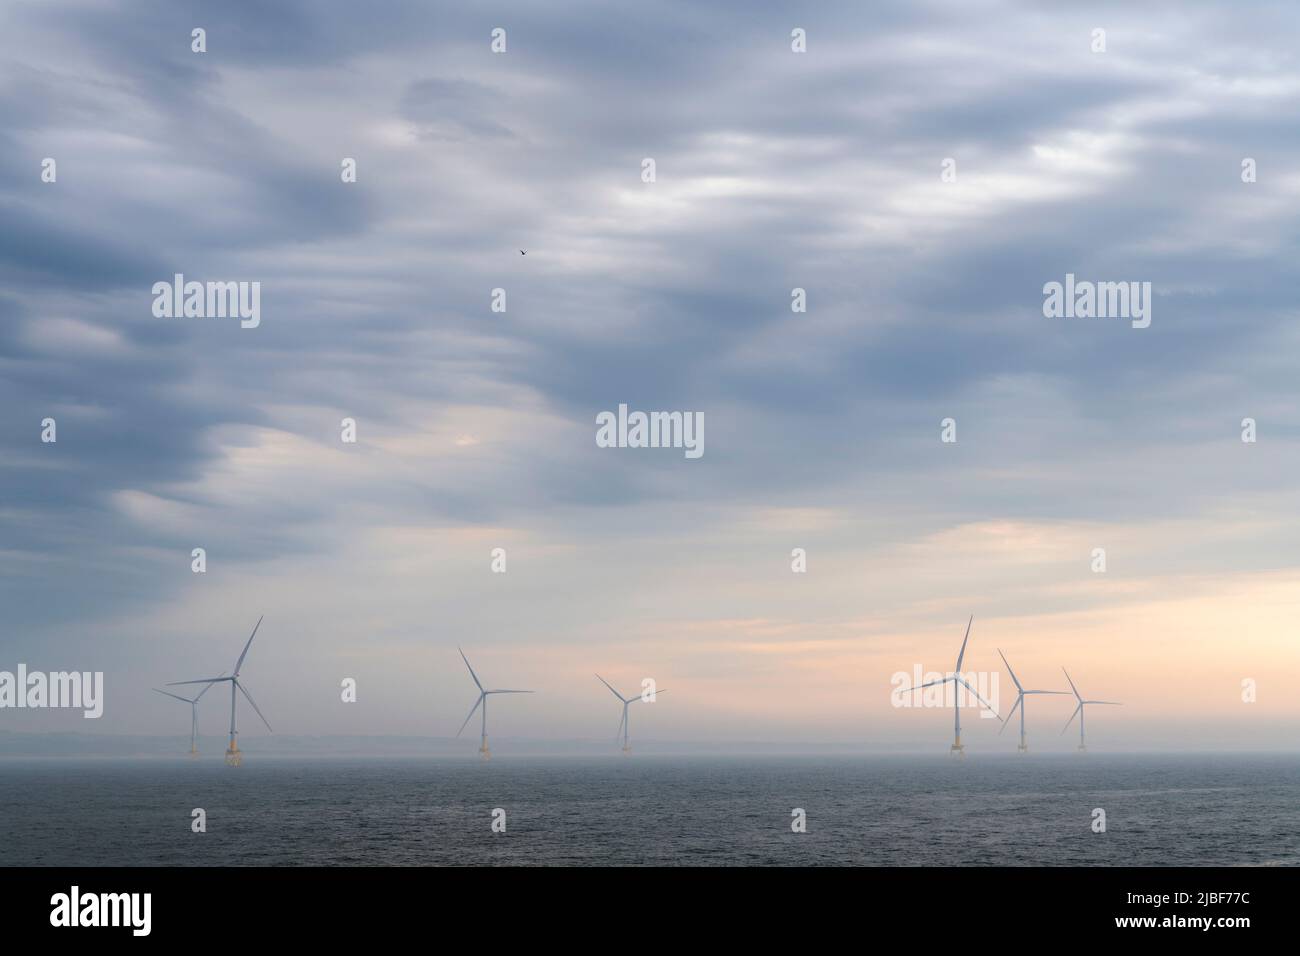 Wind turbines and clouds over North Sea Stock Photo